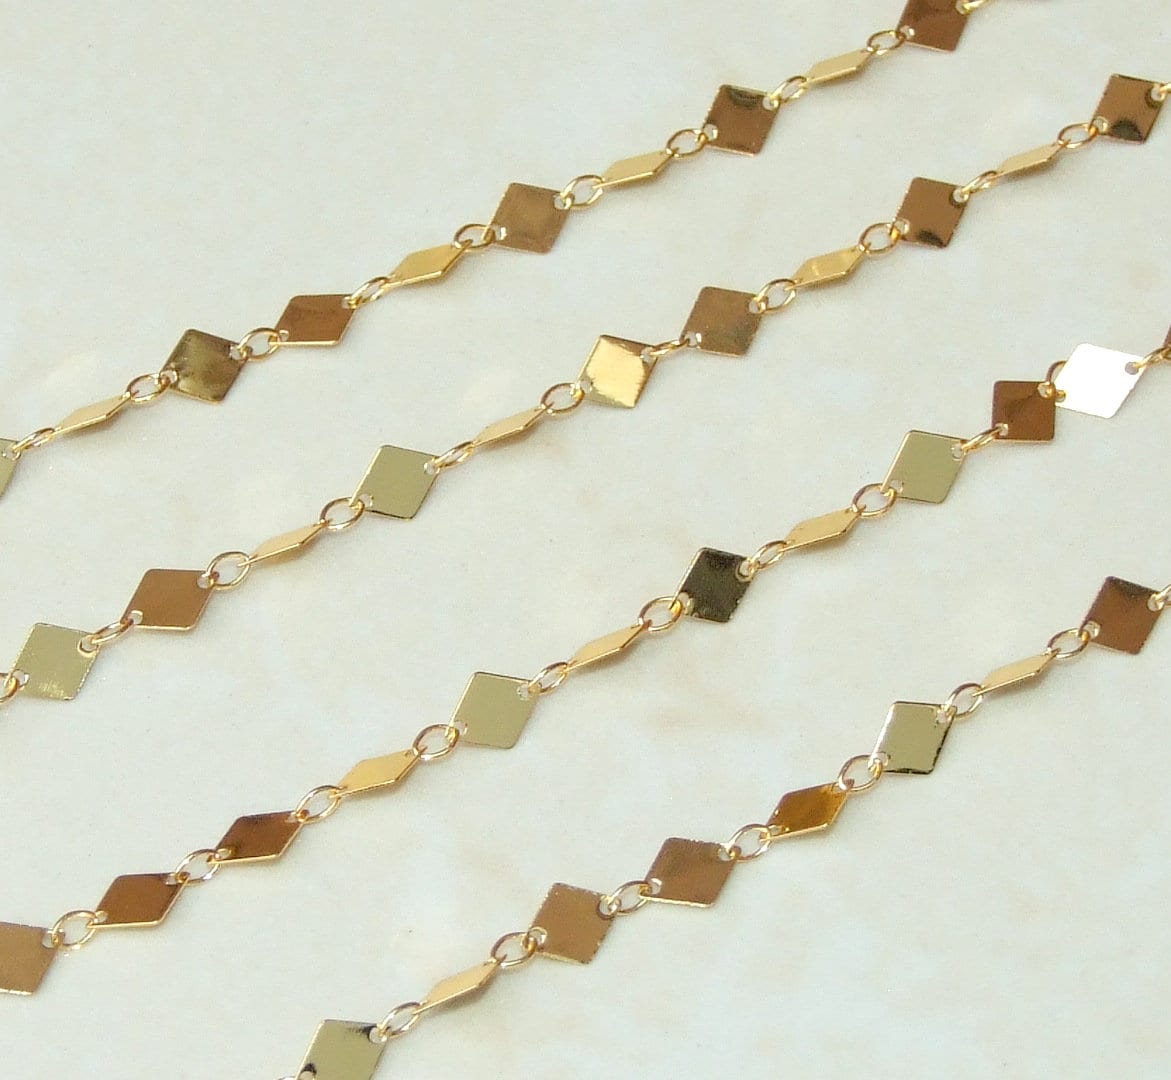 Gold Plated Rhombus Diamond Shaped Chain, Necklace Chain, Bulk Chain, Jewelry Making, Body Chain, Belly Chain, By the Foot, 8mm x 5.0mm